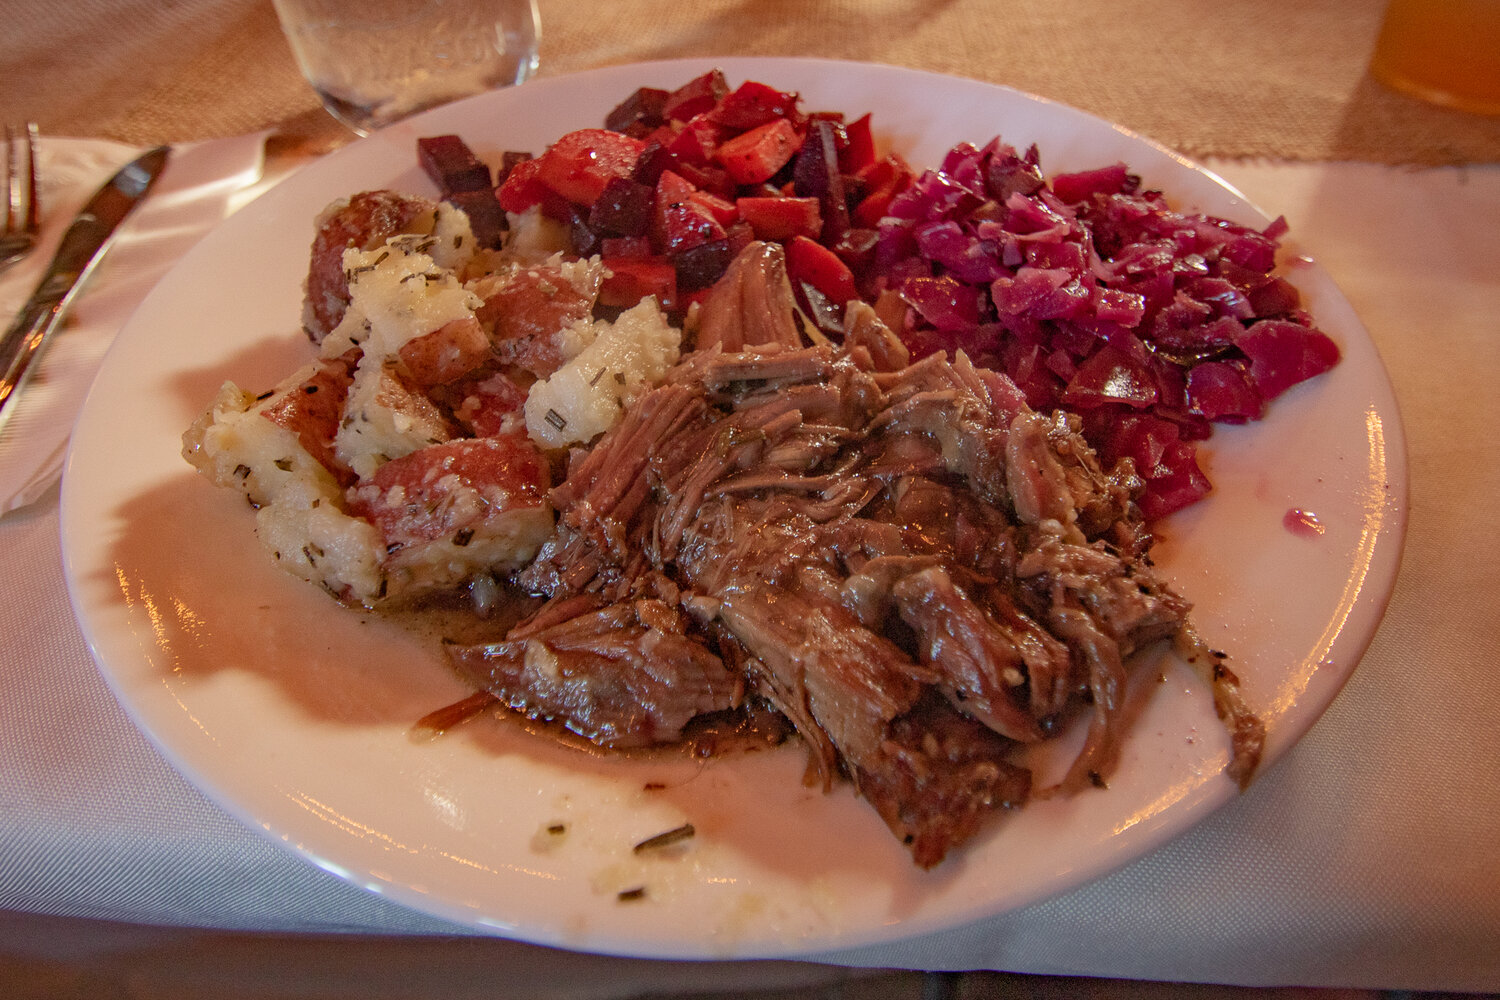 For those who attended, the farm to table dinner at The Mason Jar on Sunday, Oct. 8. featured a plate of slow-roasted lamb in a burgandy wine gravy, german red cabbage with apples, organic carrots and beets and rosemary roasted potatoes.